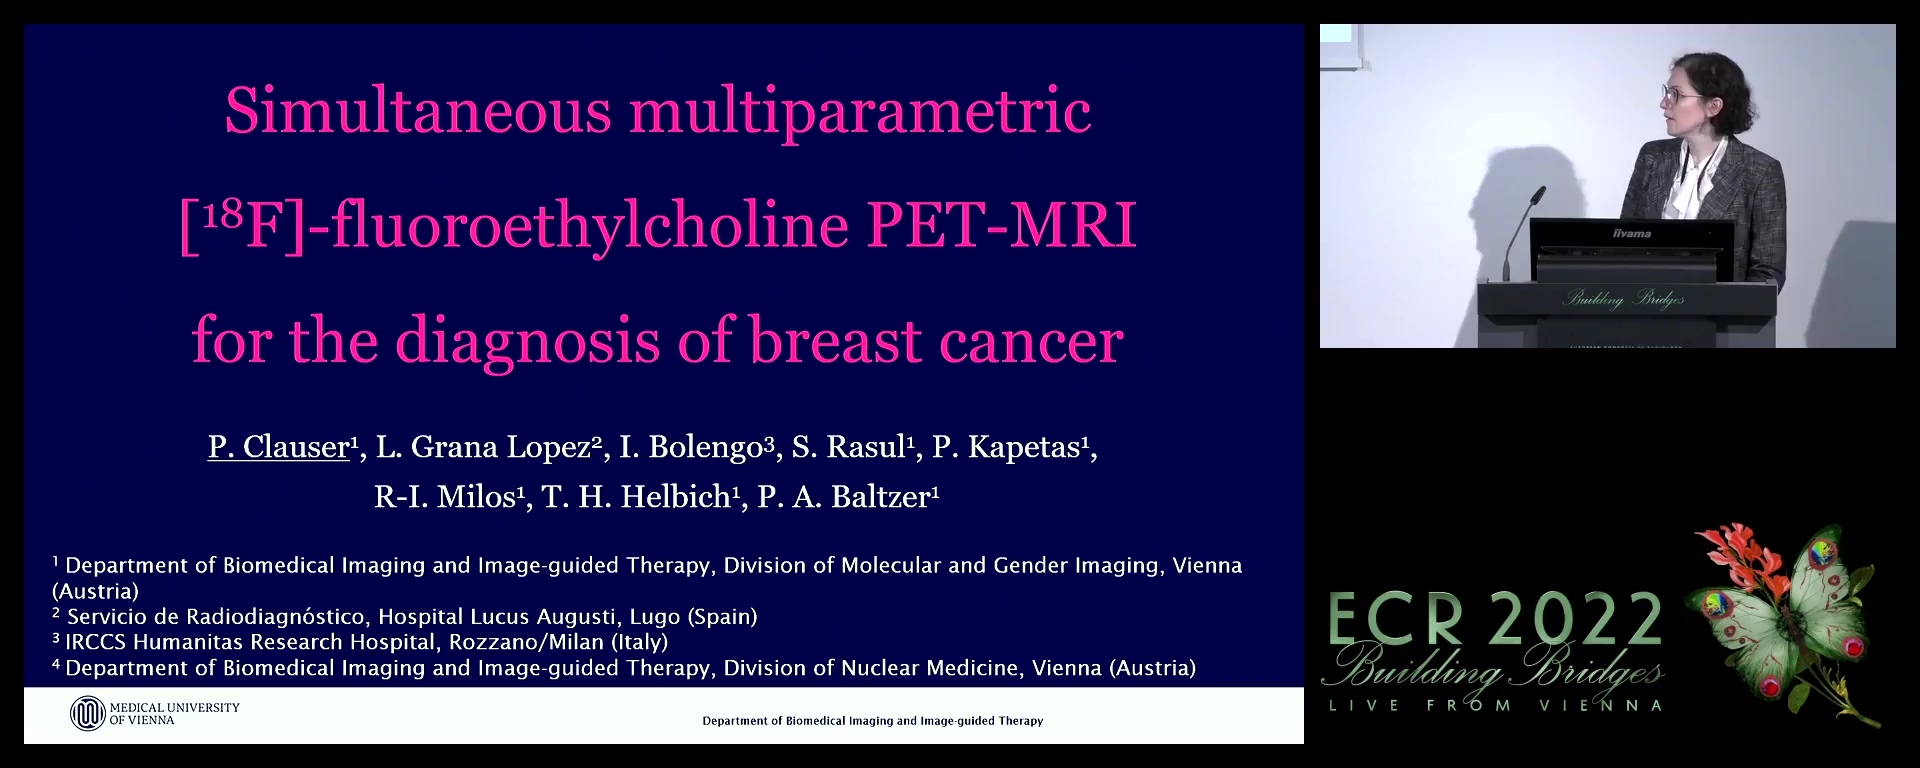 Simultaneous multiparametric [18F]-fluoroethylcholine PET-MRI for the diagnosis of breast cancer